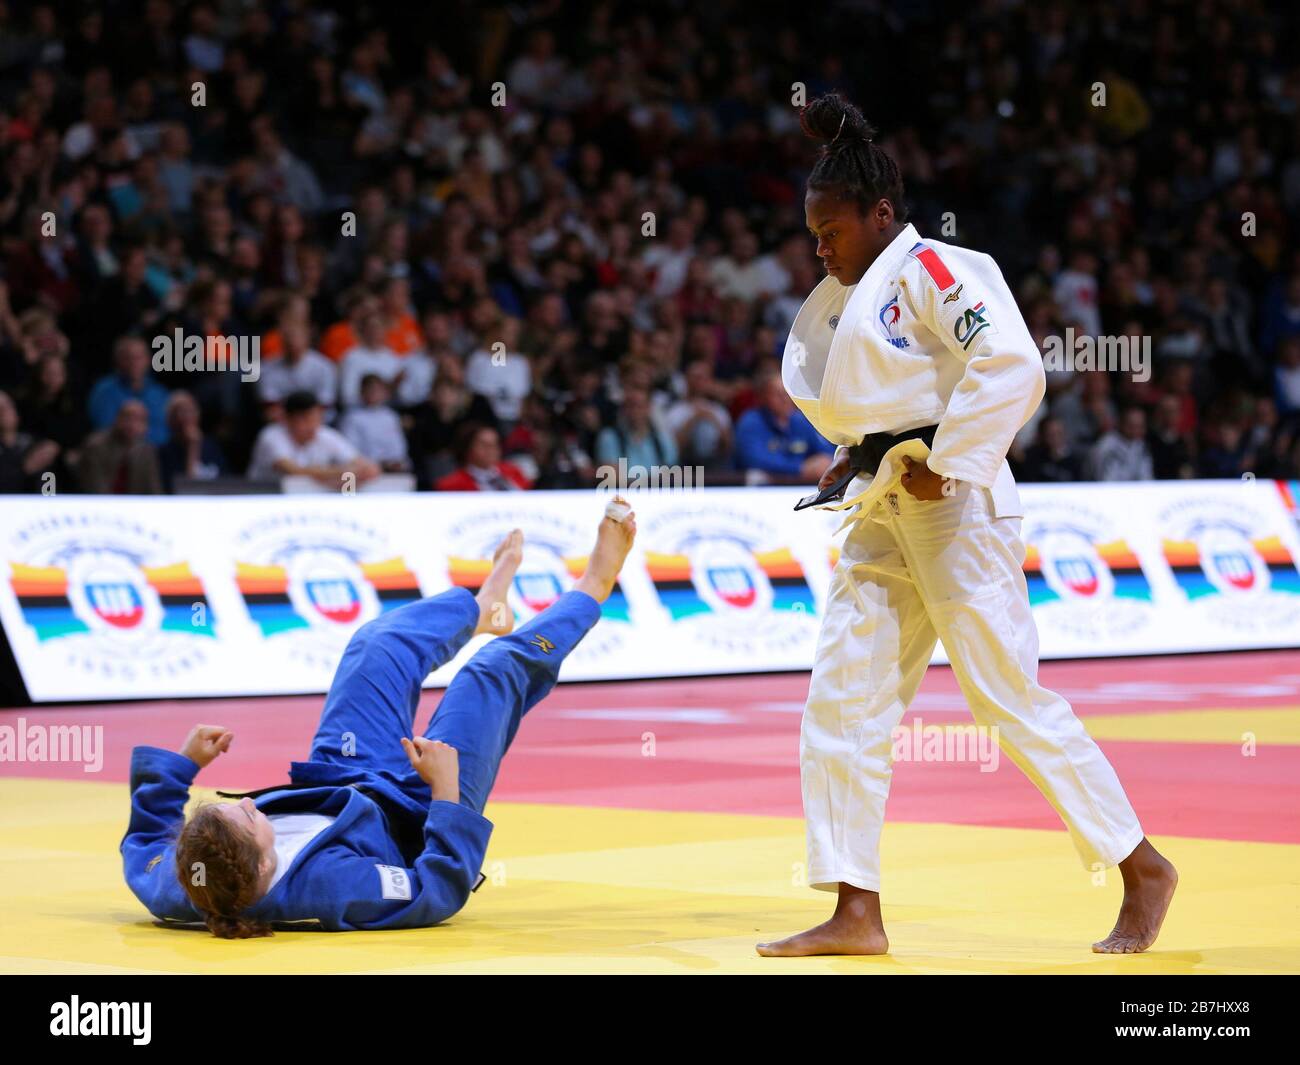 Paris, France - 08th Feb, 2020: Clarisse Agbegnenou for France against Beauchemin-Pinard for Canada, Women's -63 kg, Quarter-final (Credit: Mickael Chavet) Stock Photo